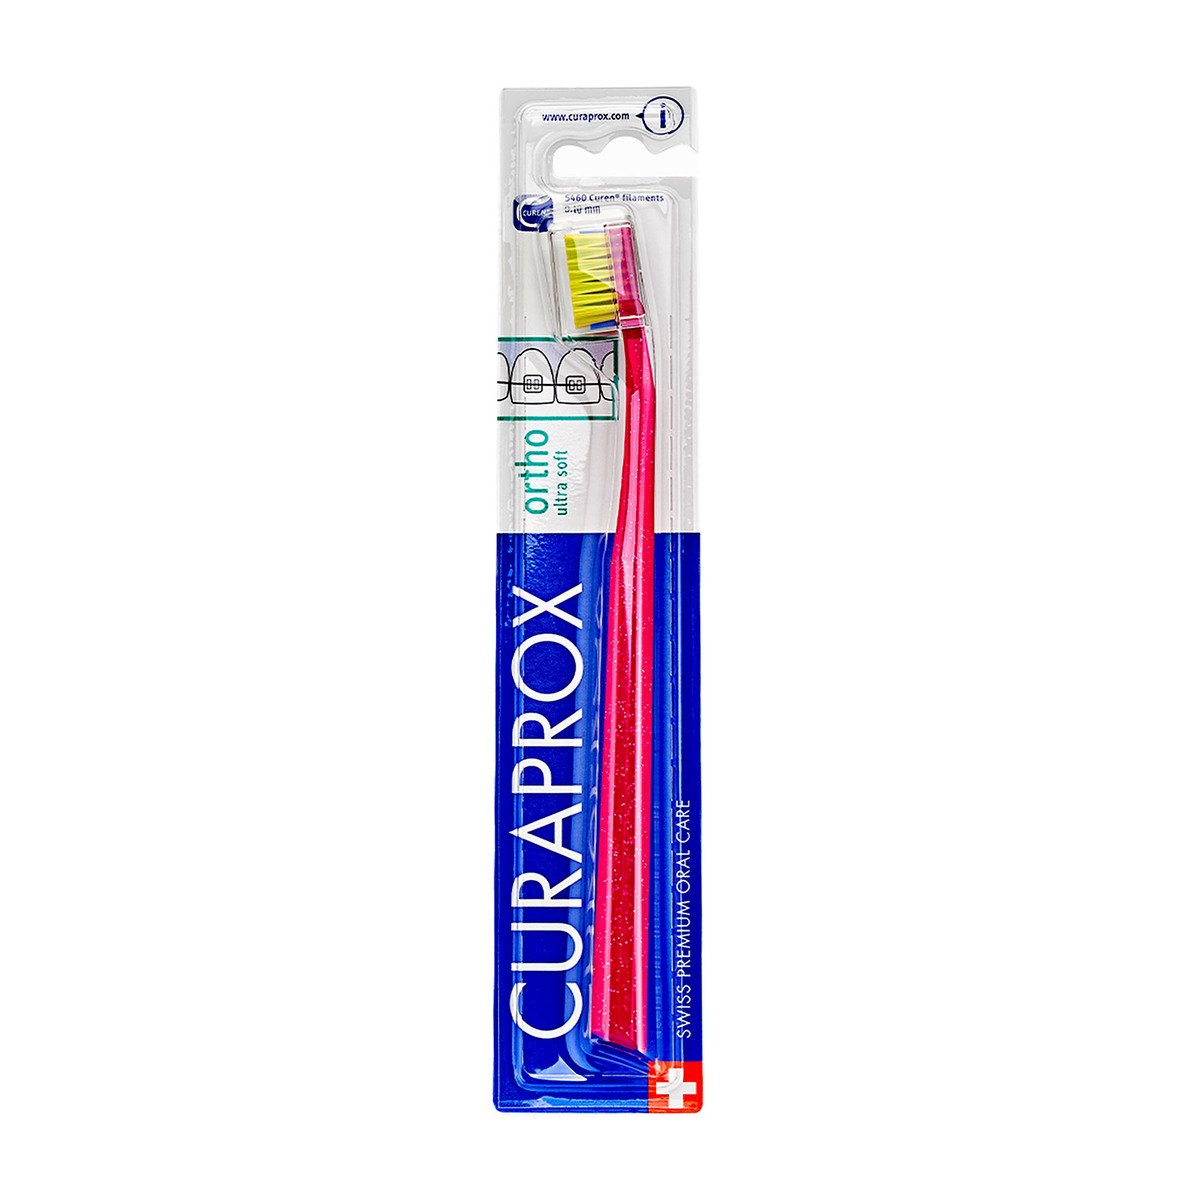 Curaprox Toothbrush Ortho Ultra Soft for Adults CS5460 1 pc